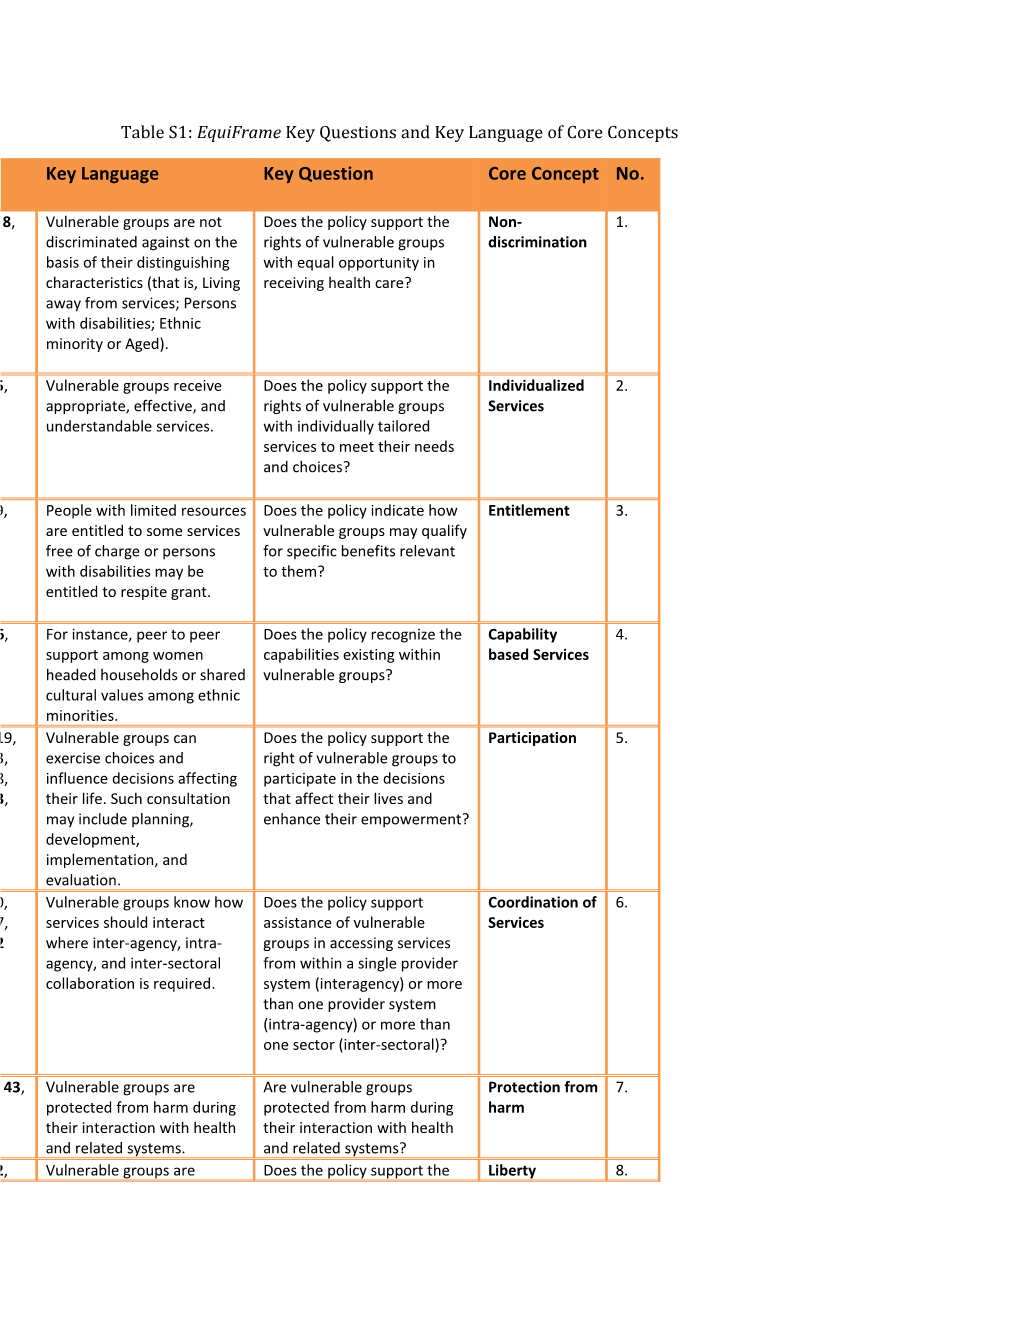 Table S1: Equiframe Key Questions and Key Language of Core Concepts